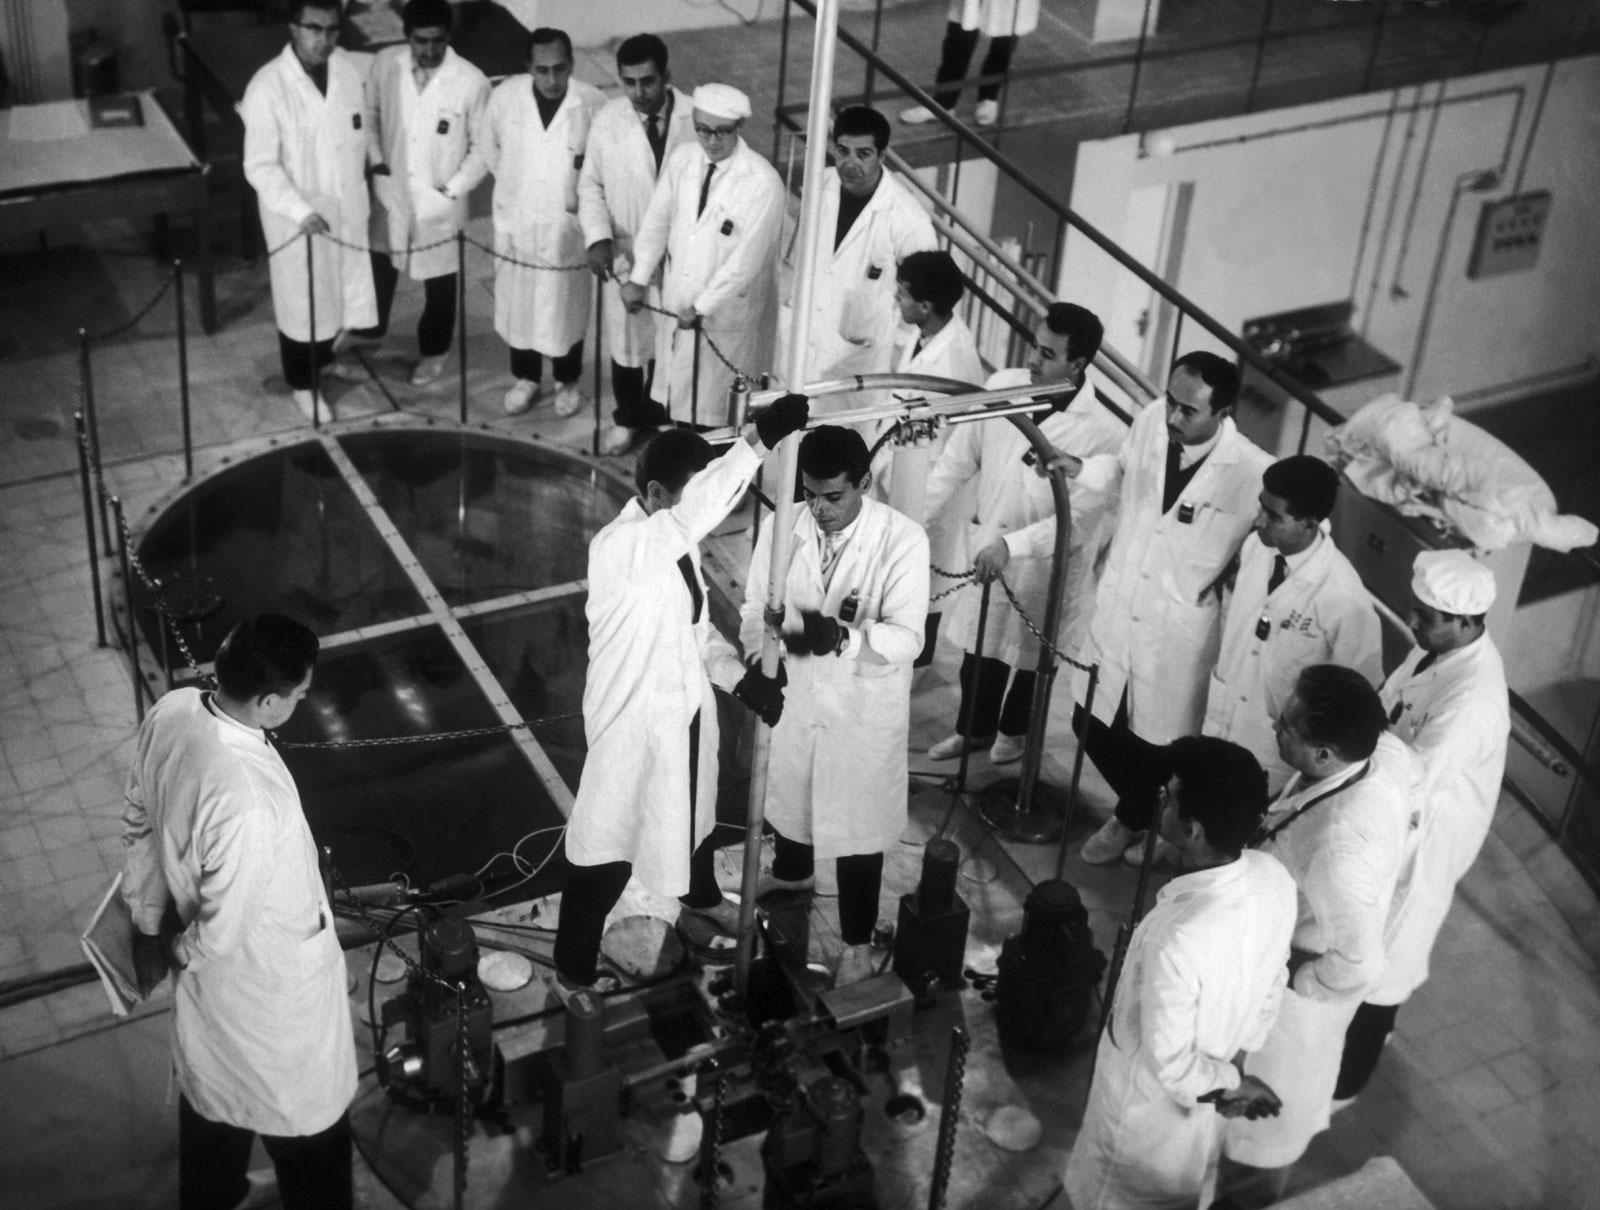 Scientists inspecting Iraq’s first nuclear reactor in Baghdad, supplied by the Soviets, February 1968